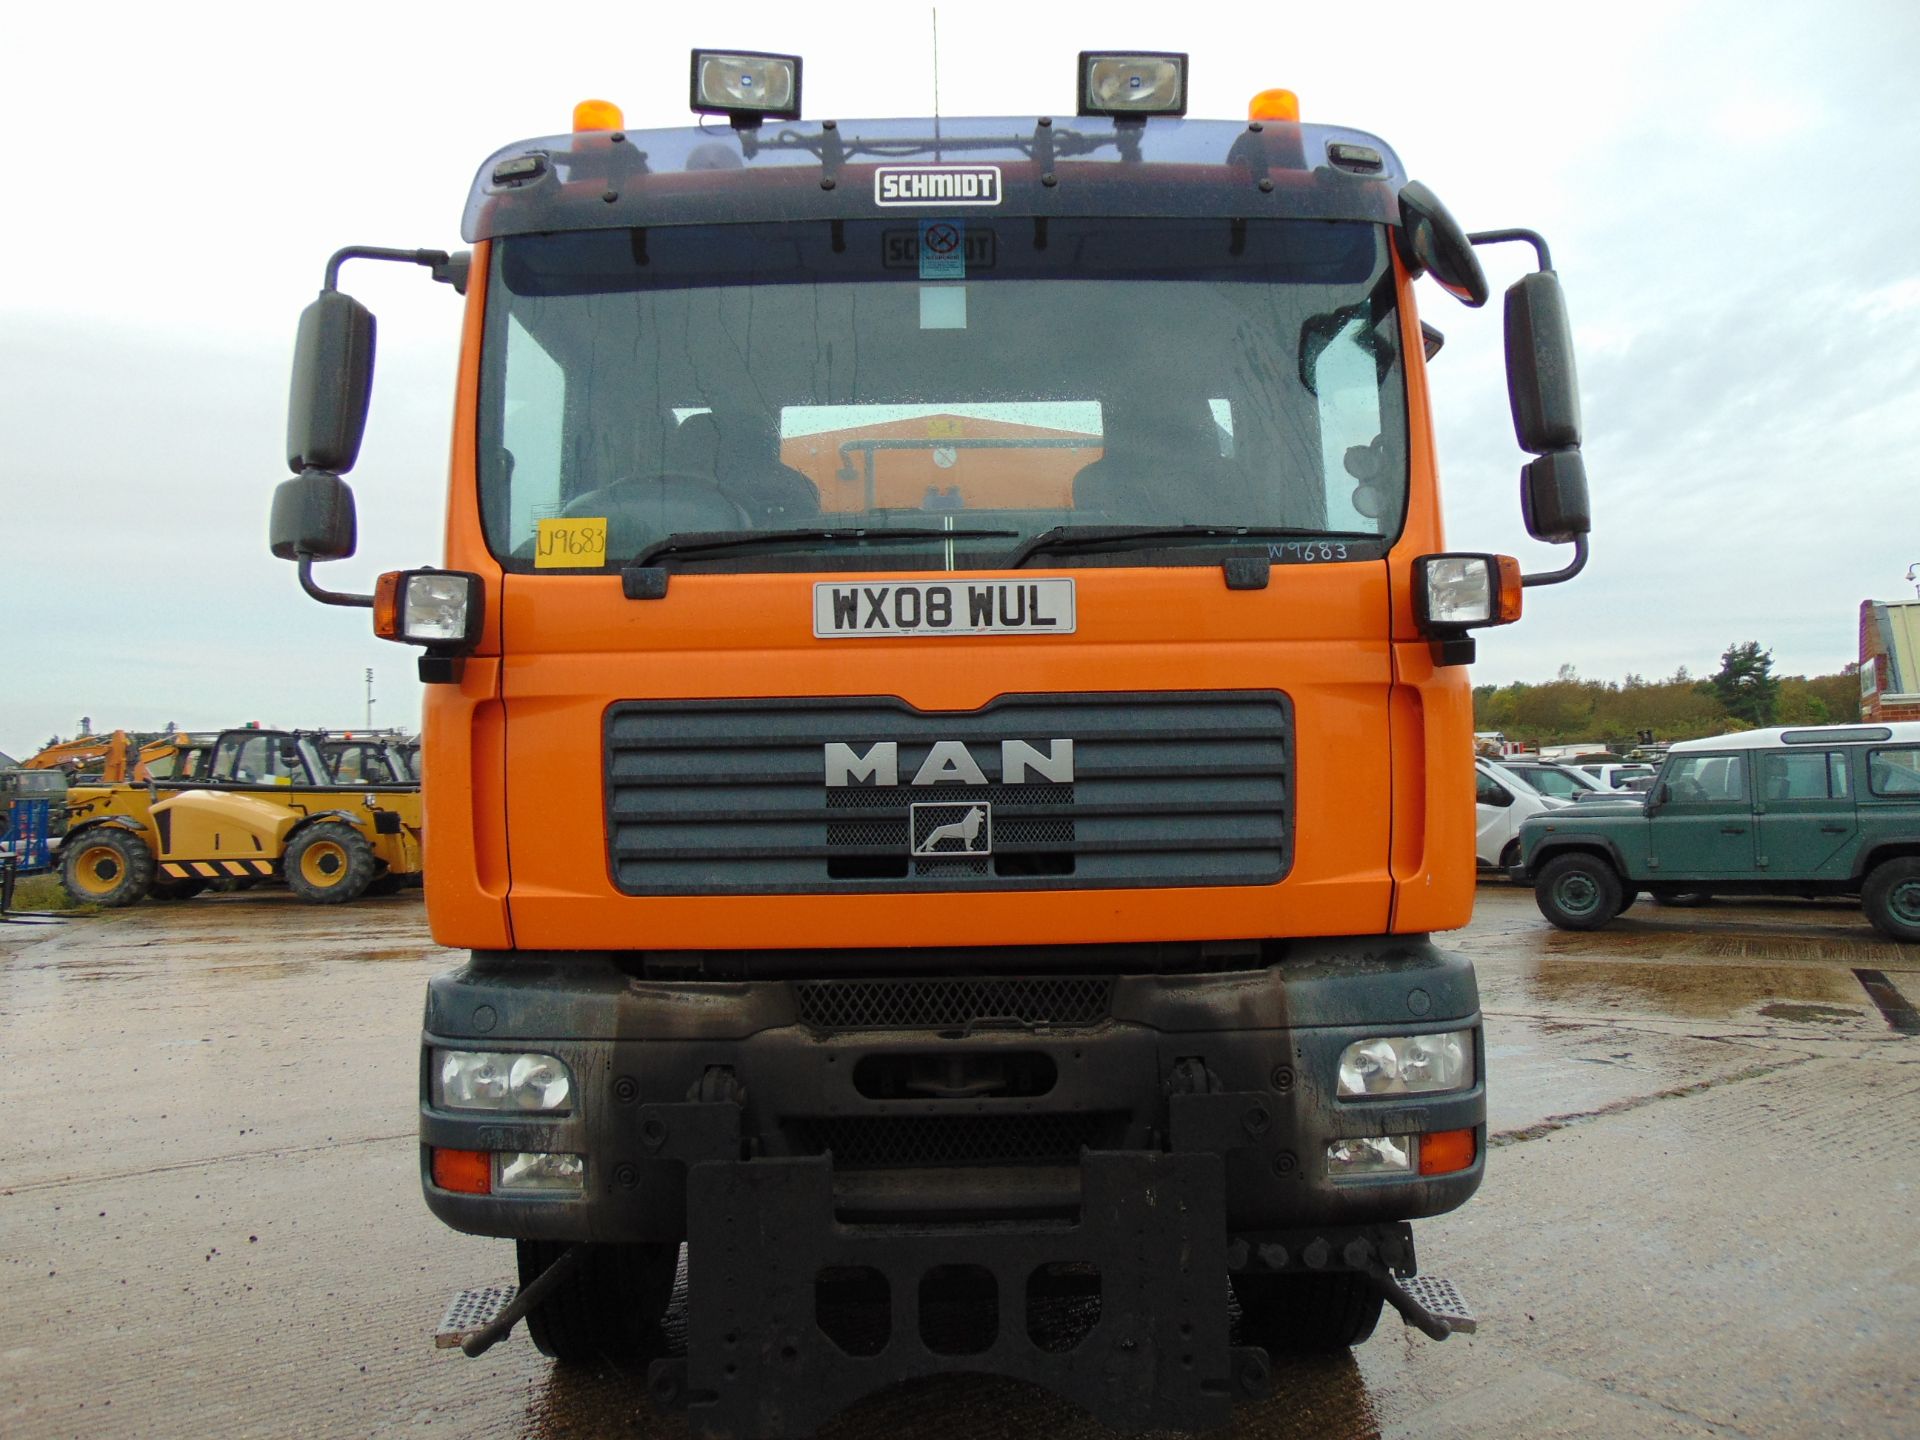 2008 MAN TGM 18.280 18T 4wd Gritter Lorry C/W Schmidt Gritter Body 34,000 kms only - Image 2 of 23